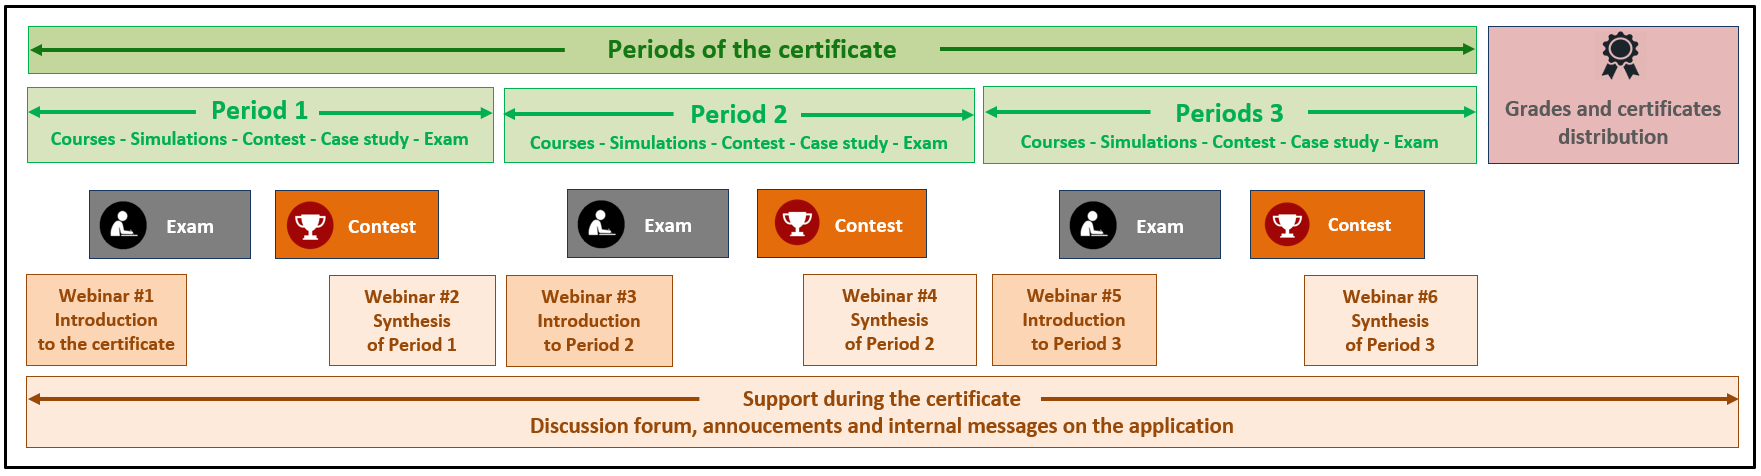 Structure of the certificate